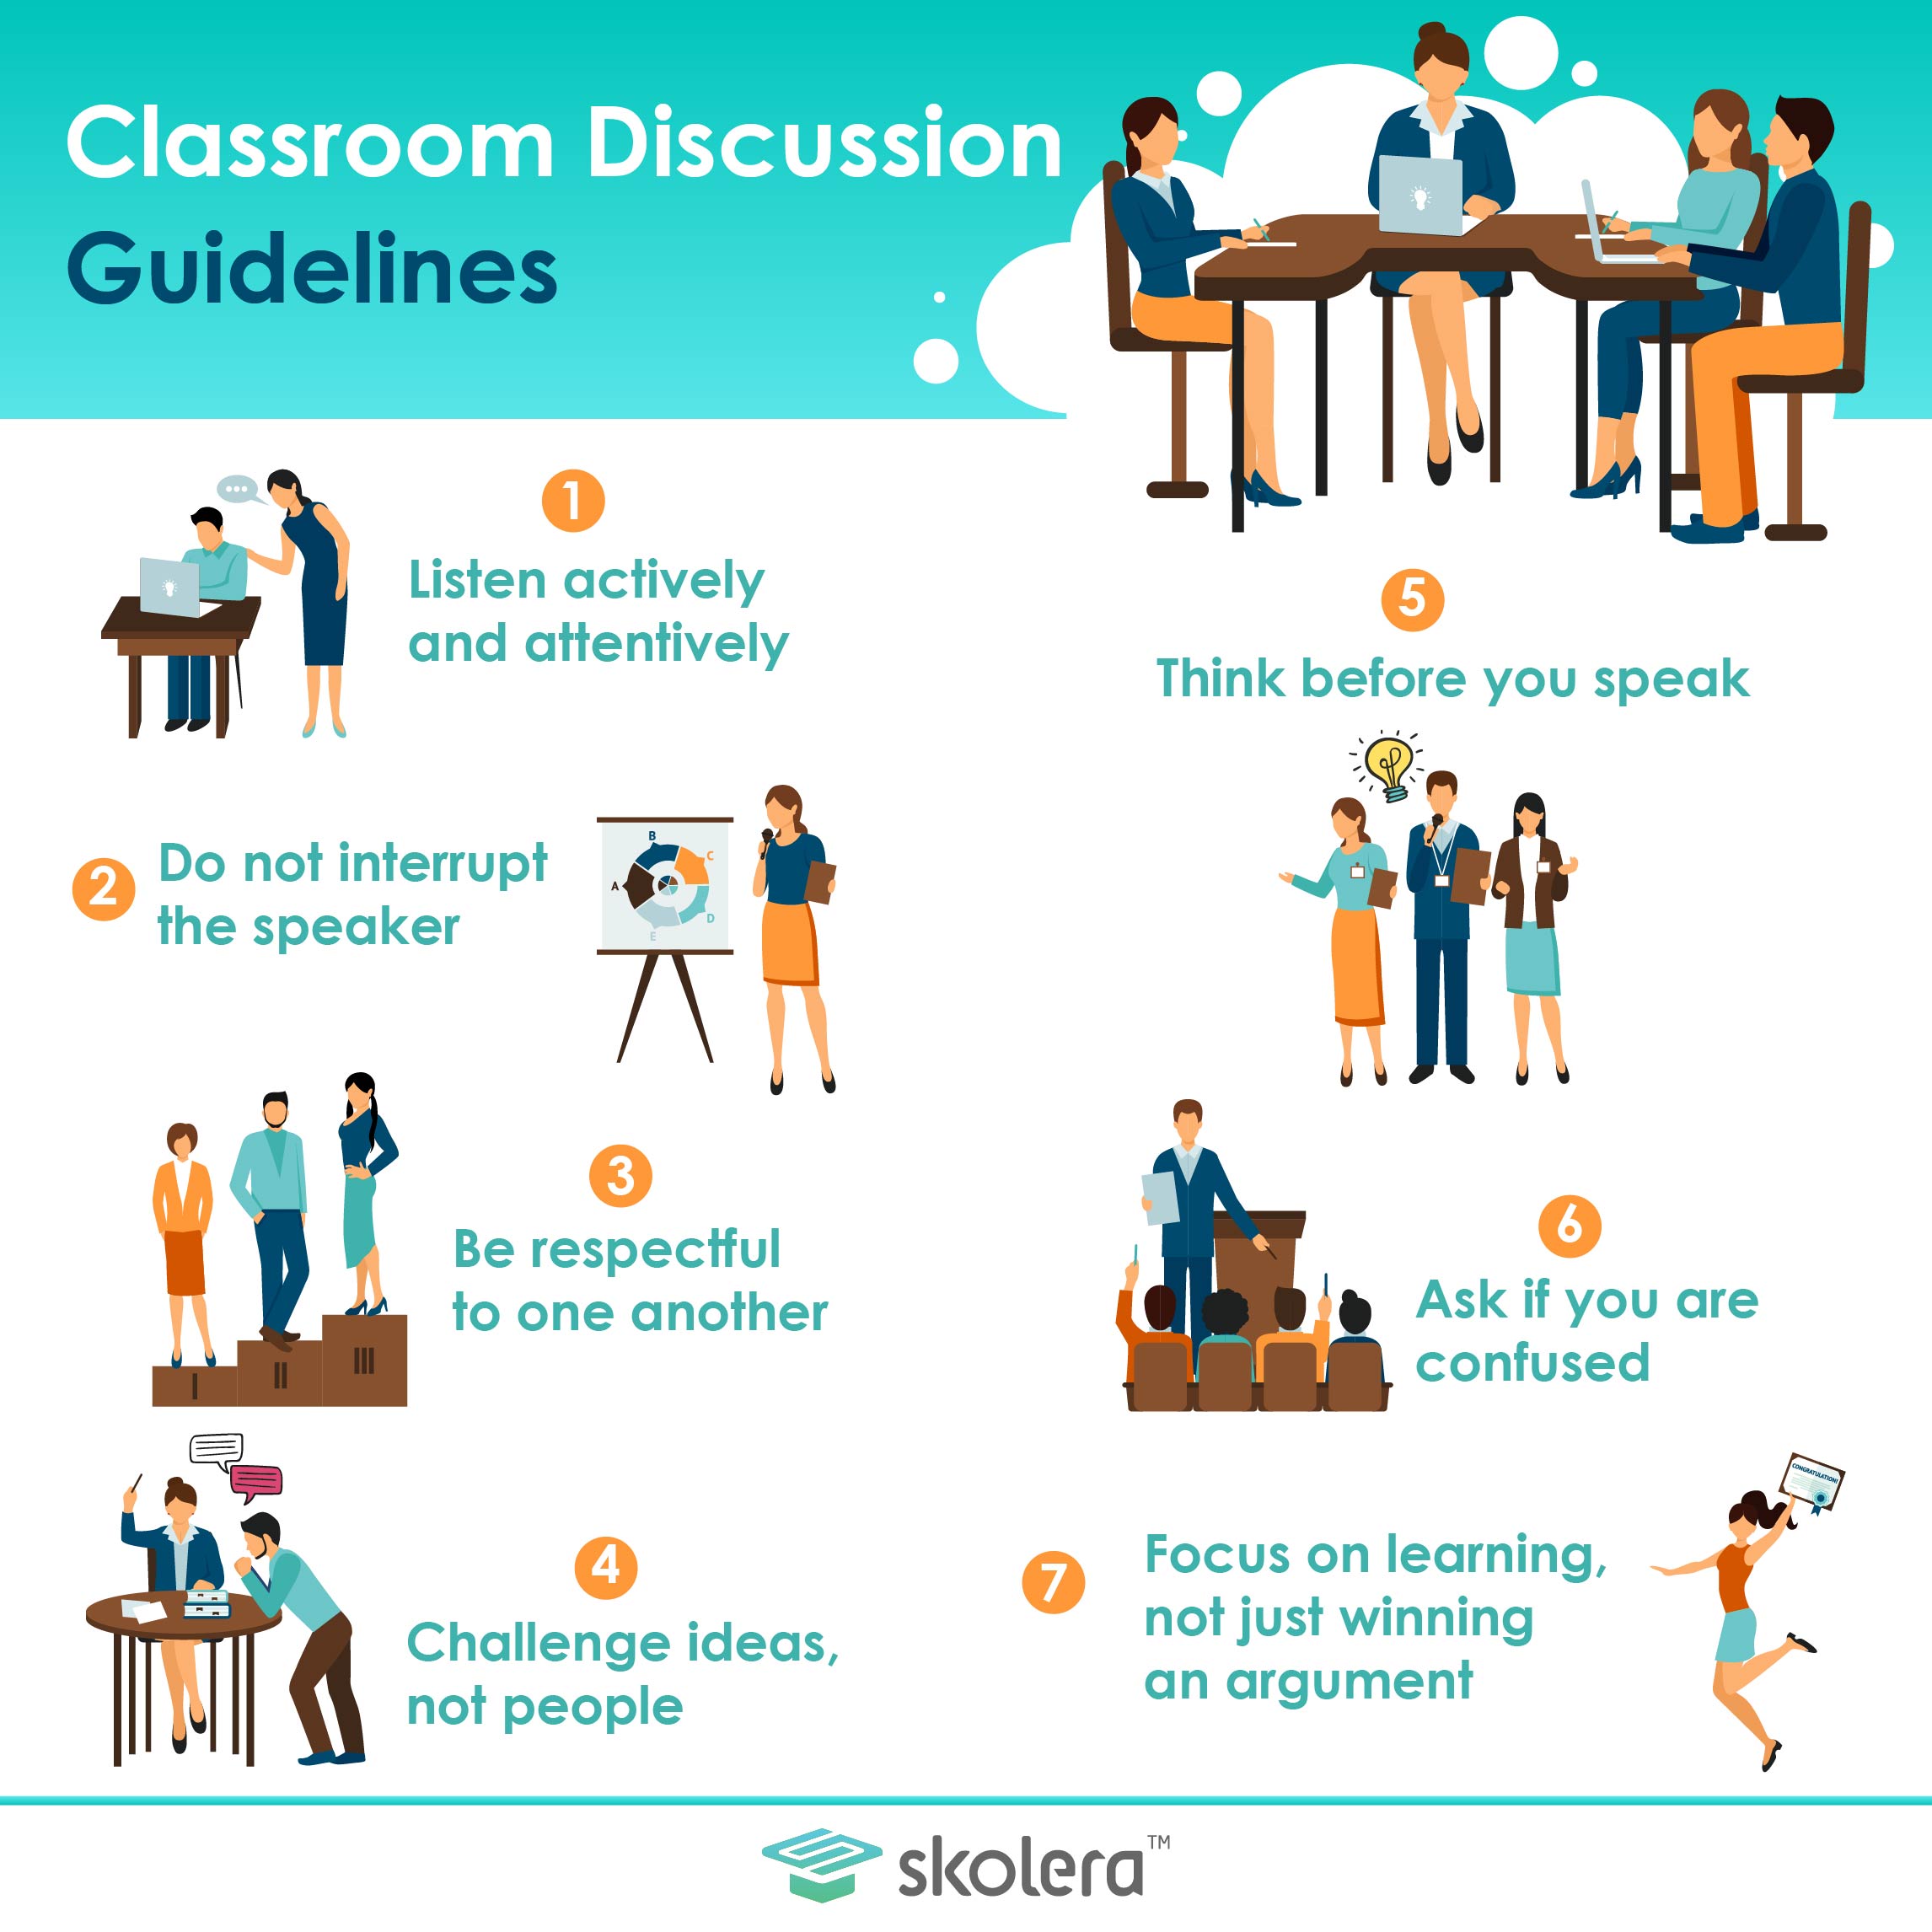 3 Discussionbased teaching methods and strategies and how to carry